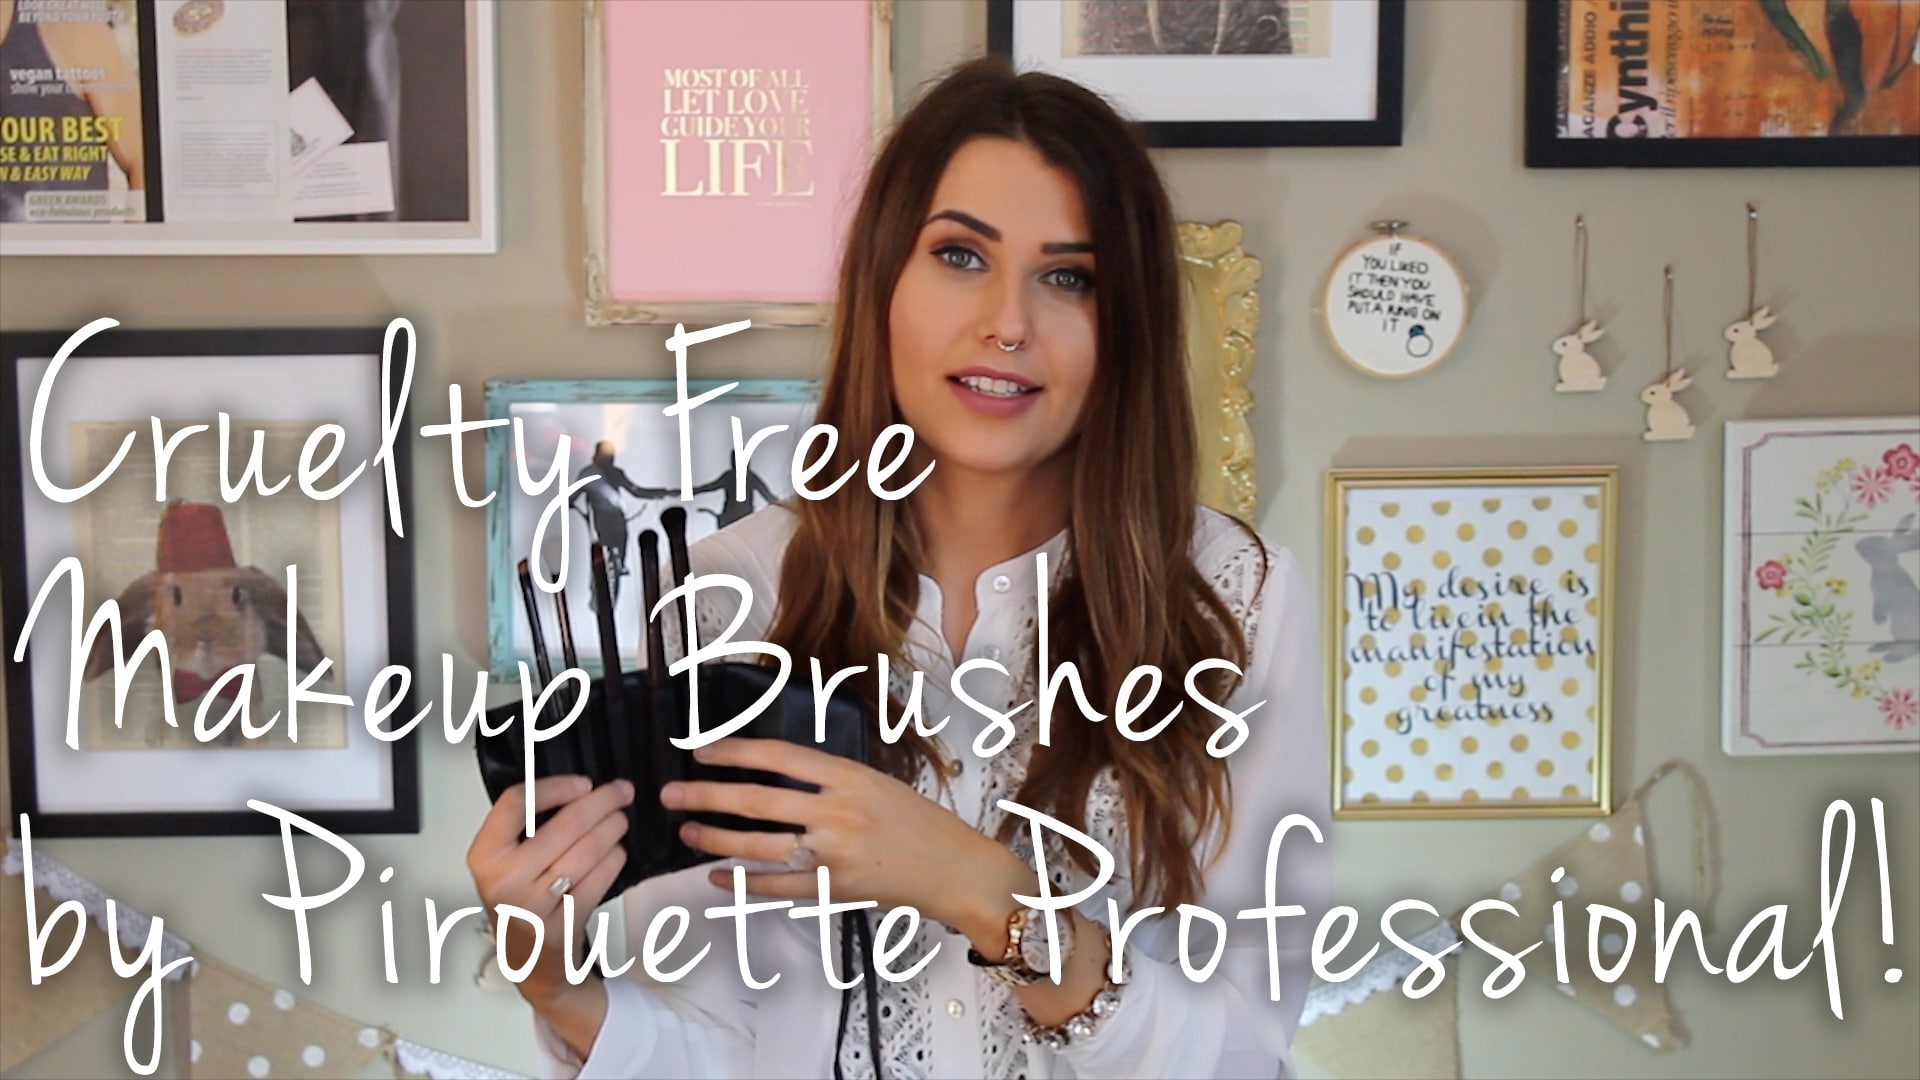 Intro to Pirouette Professional Brushes Video